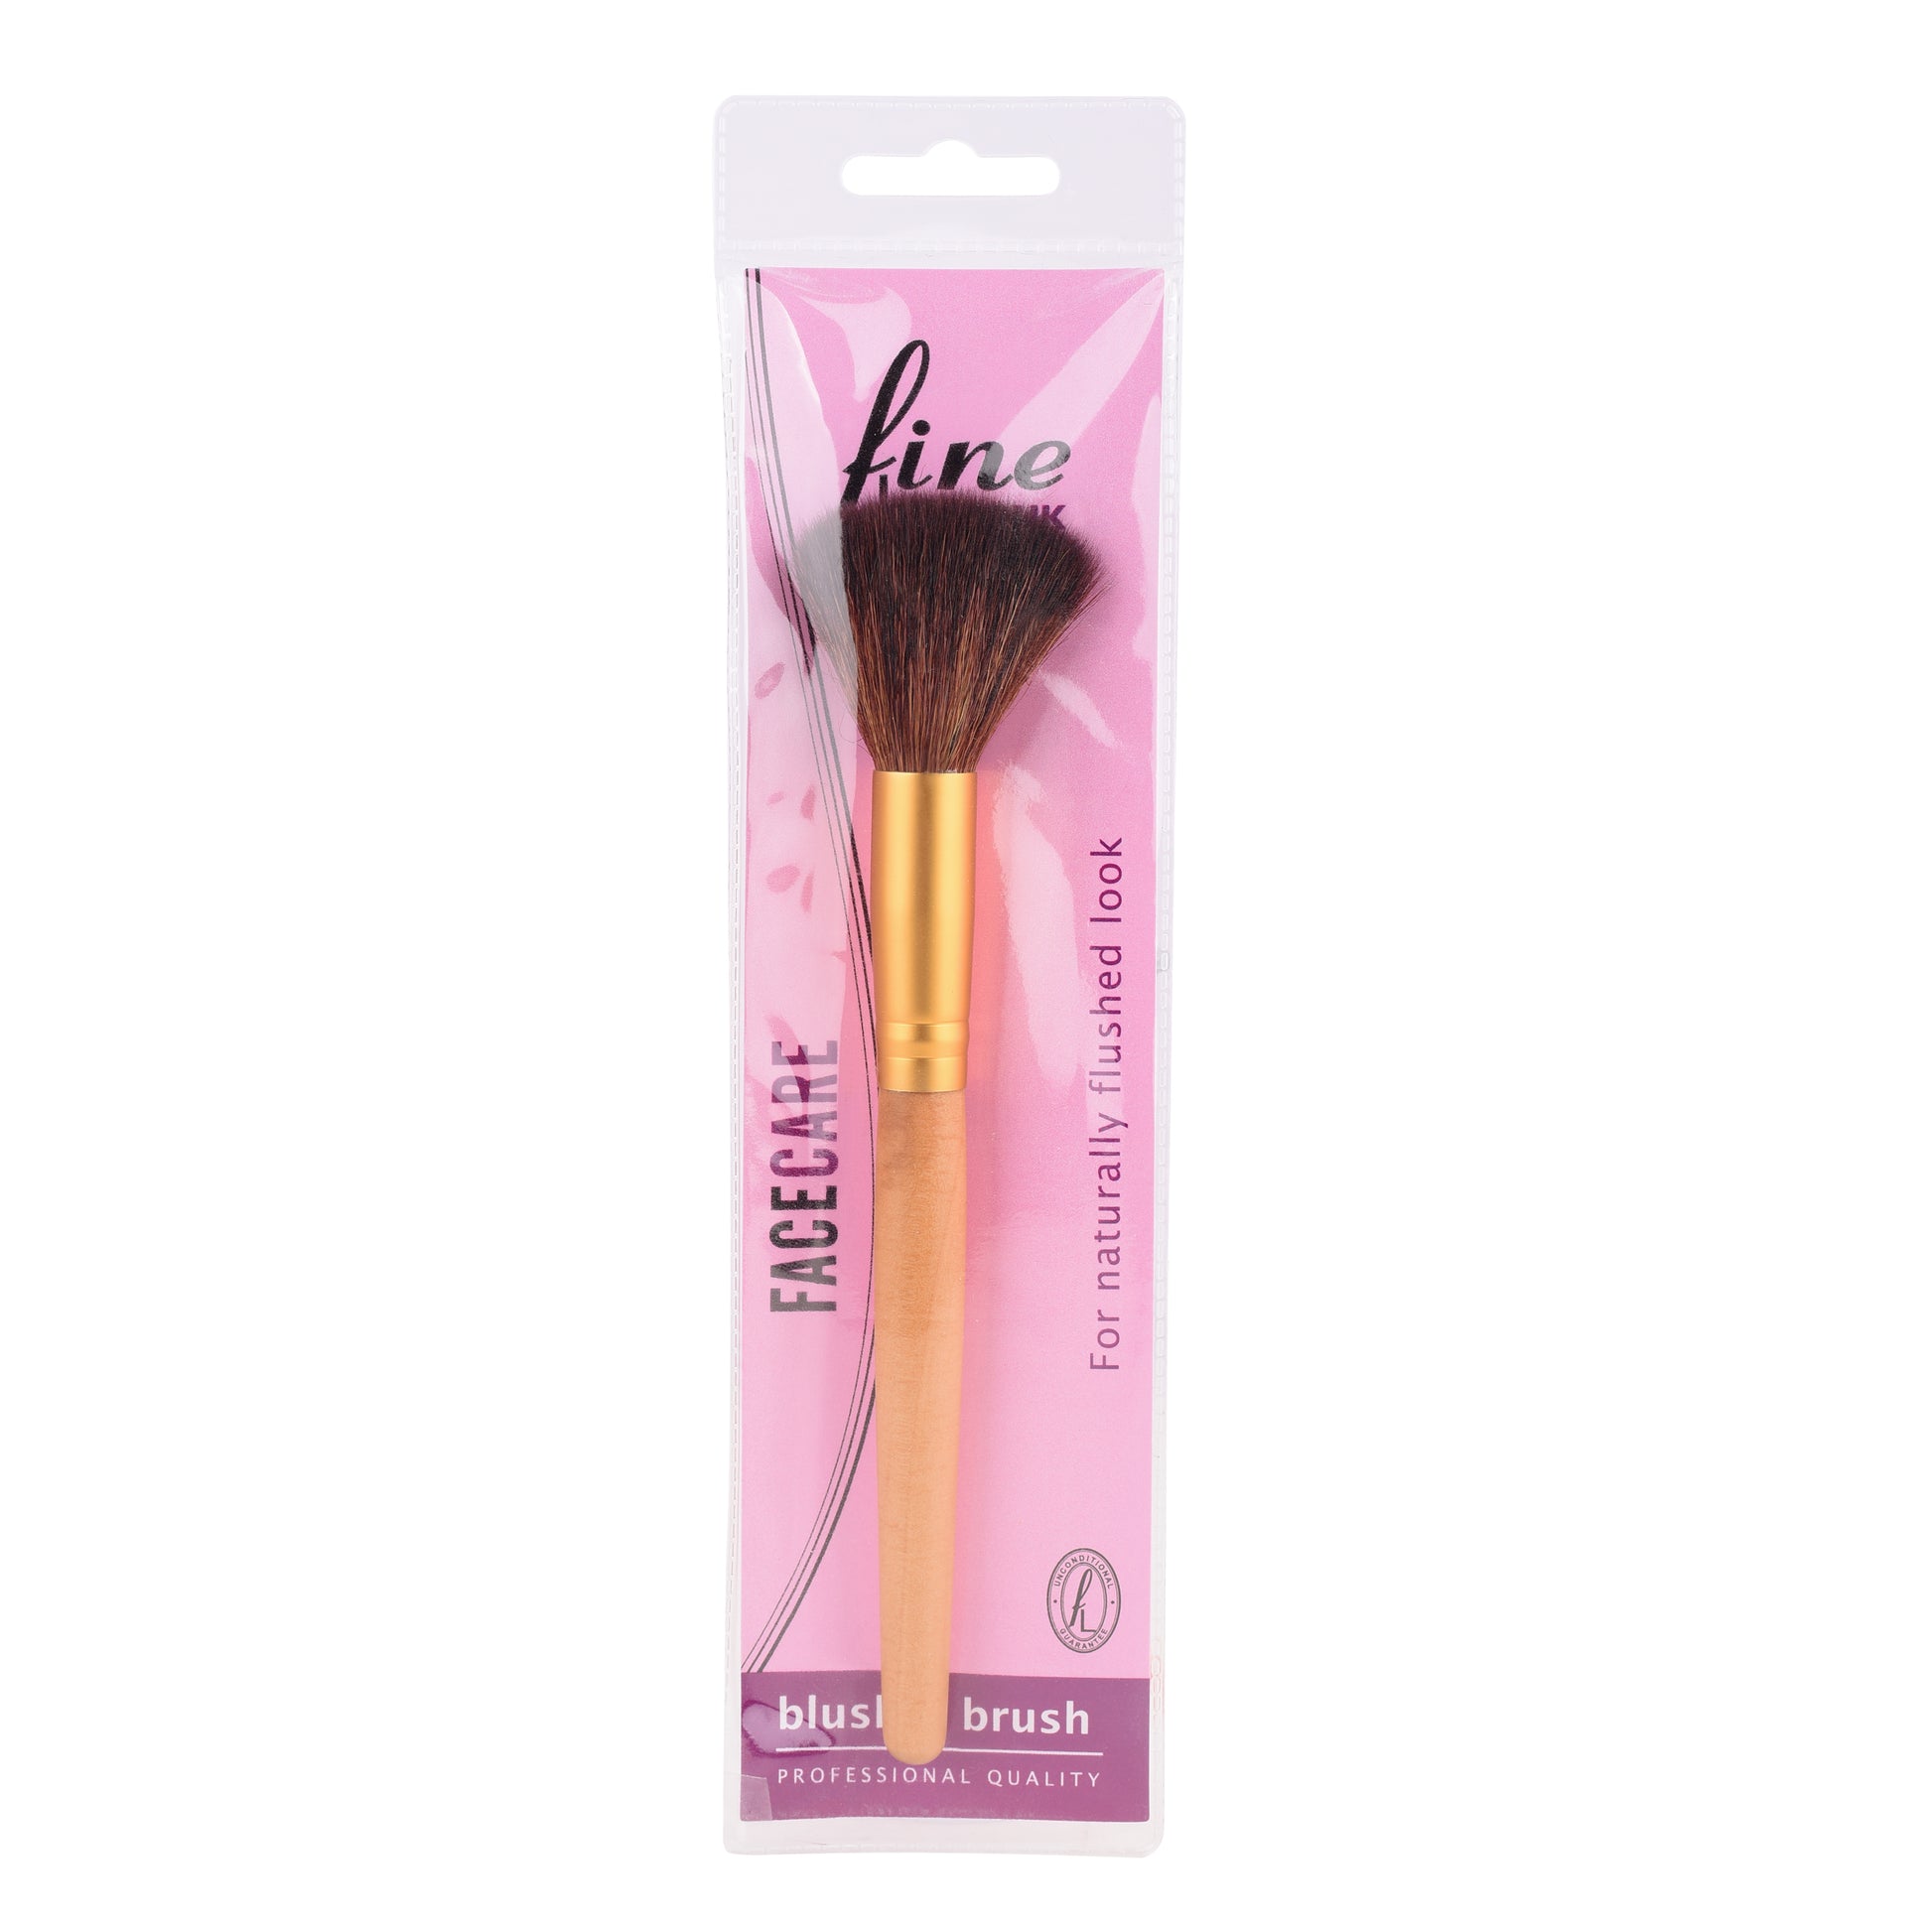 Enhance your makeup routine with our Fine Domed-Shaped Natural Fiber Blusher Brush. Designed for perfect application, this professional brush effortlessly blends blush for a natural, seamless finish. Ideal for both everyday and professional use.